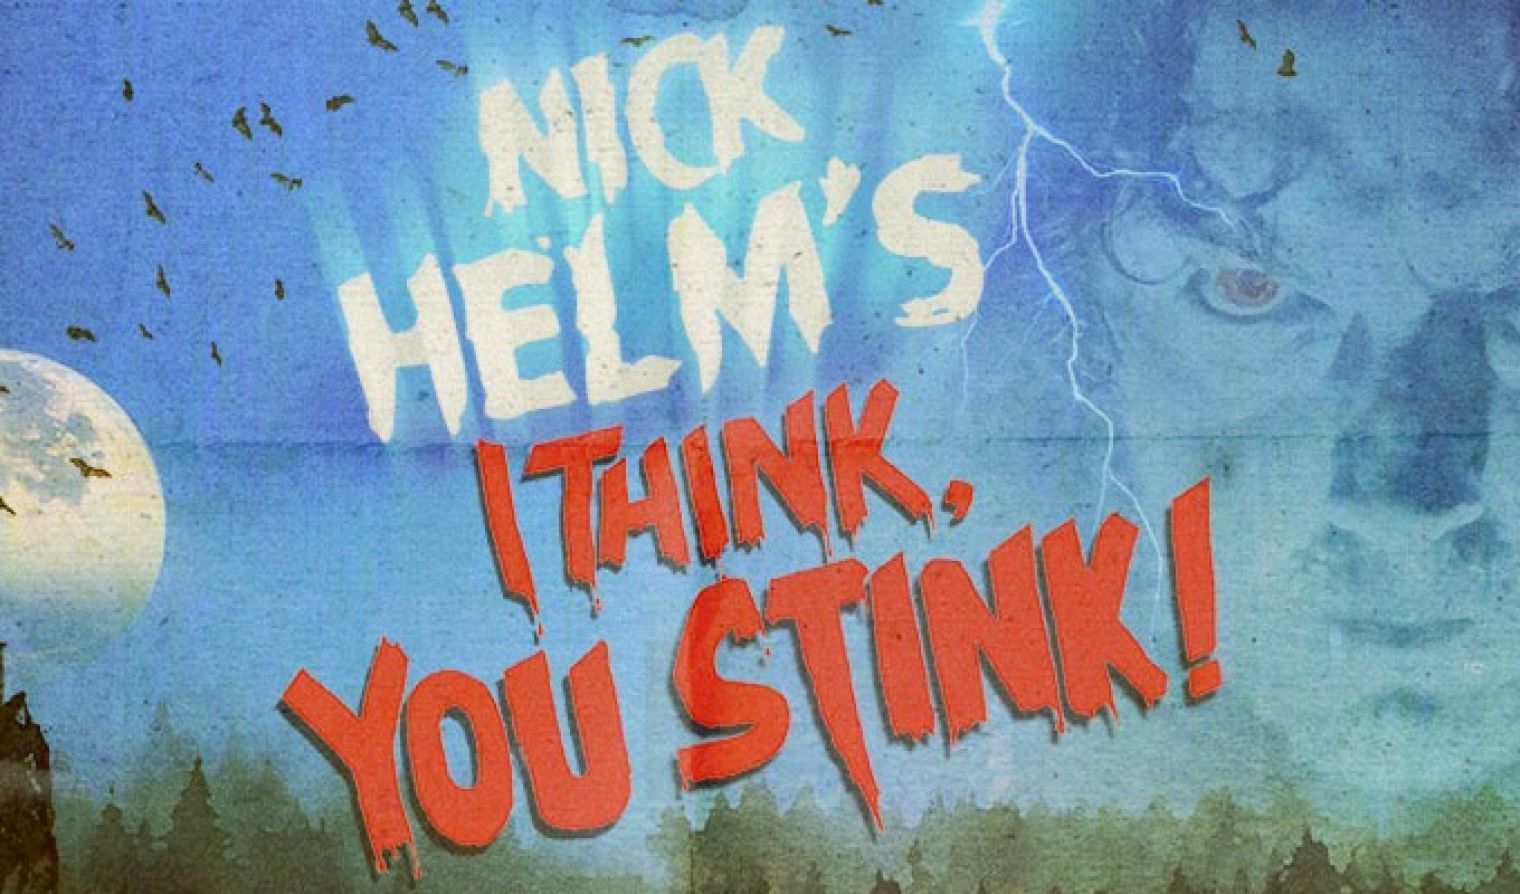 Nick Helm's legendary 'I Think You Stink' hit Edinburgh comedy show returns for a limited run at the Soho Theatre this November